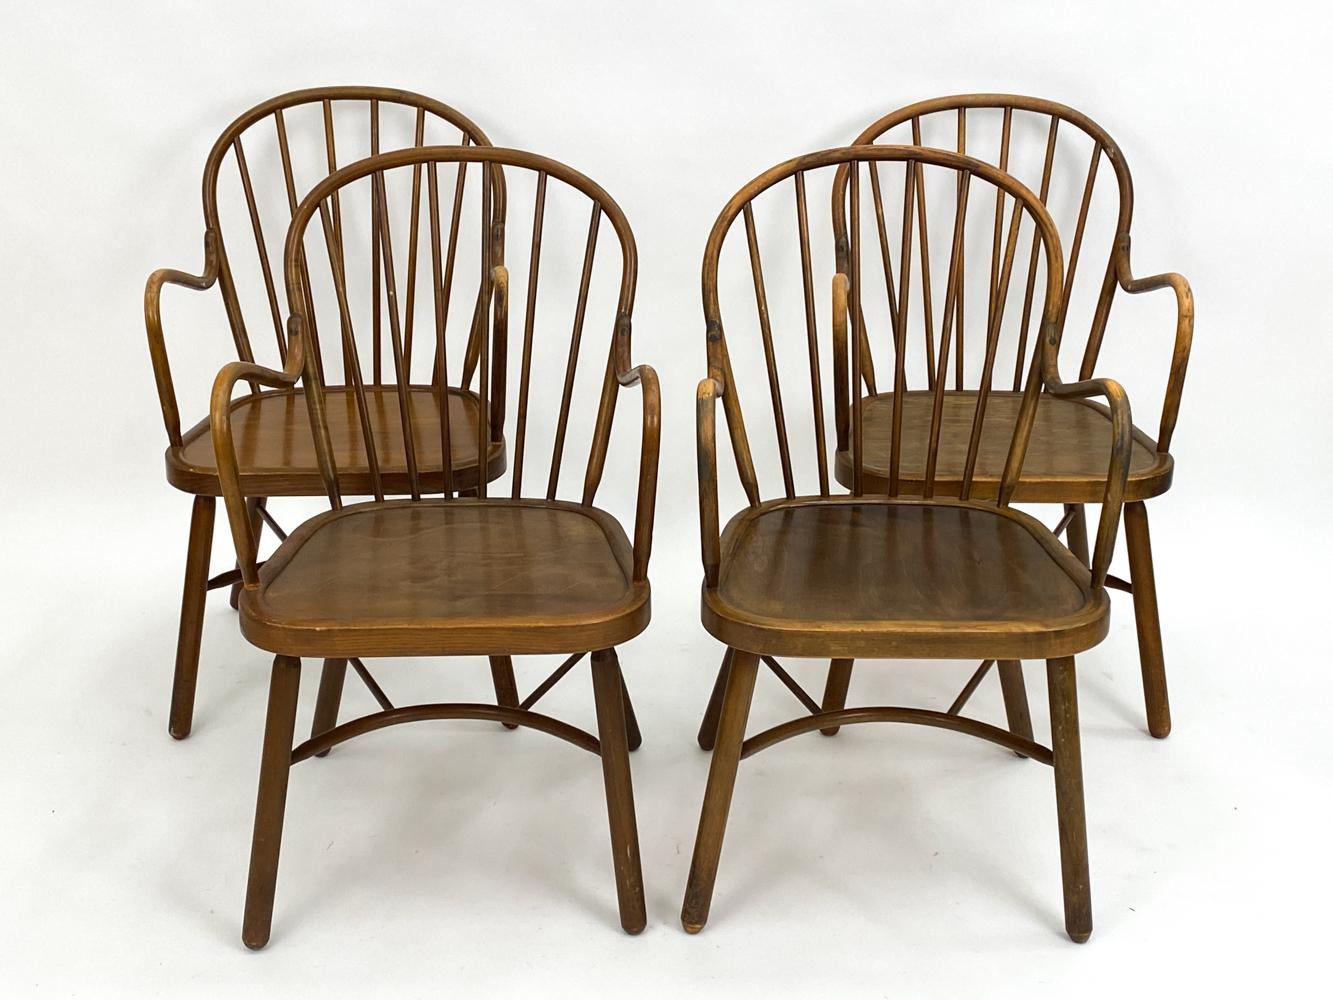 Bask in the timeless elegance of these four Beech Windsor Chairs, artfully designed in the manner of the illustrious Frits Henningsen. Crafted with precision and passion, each chair emanates a charm reminiscent of mid-century modernity, fused with